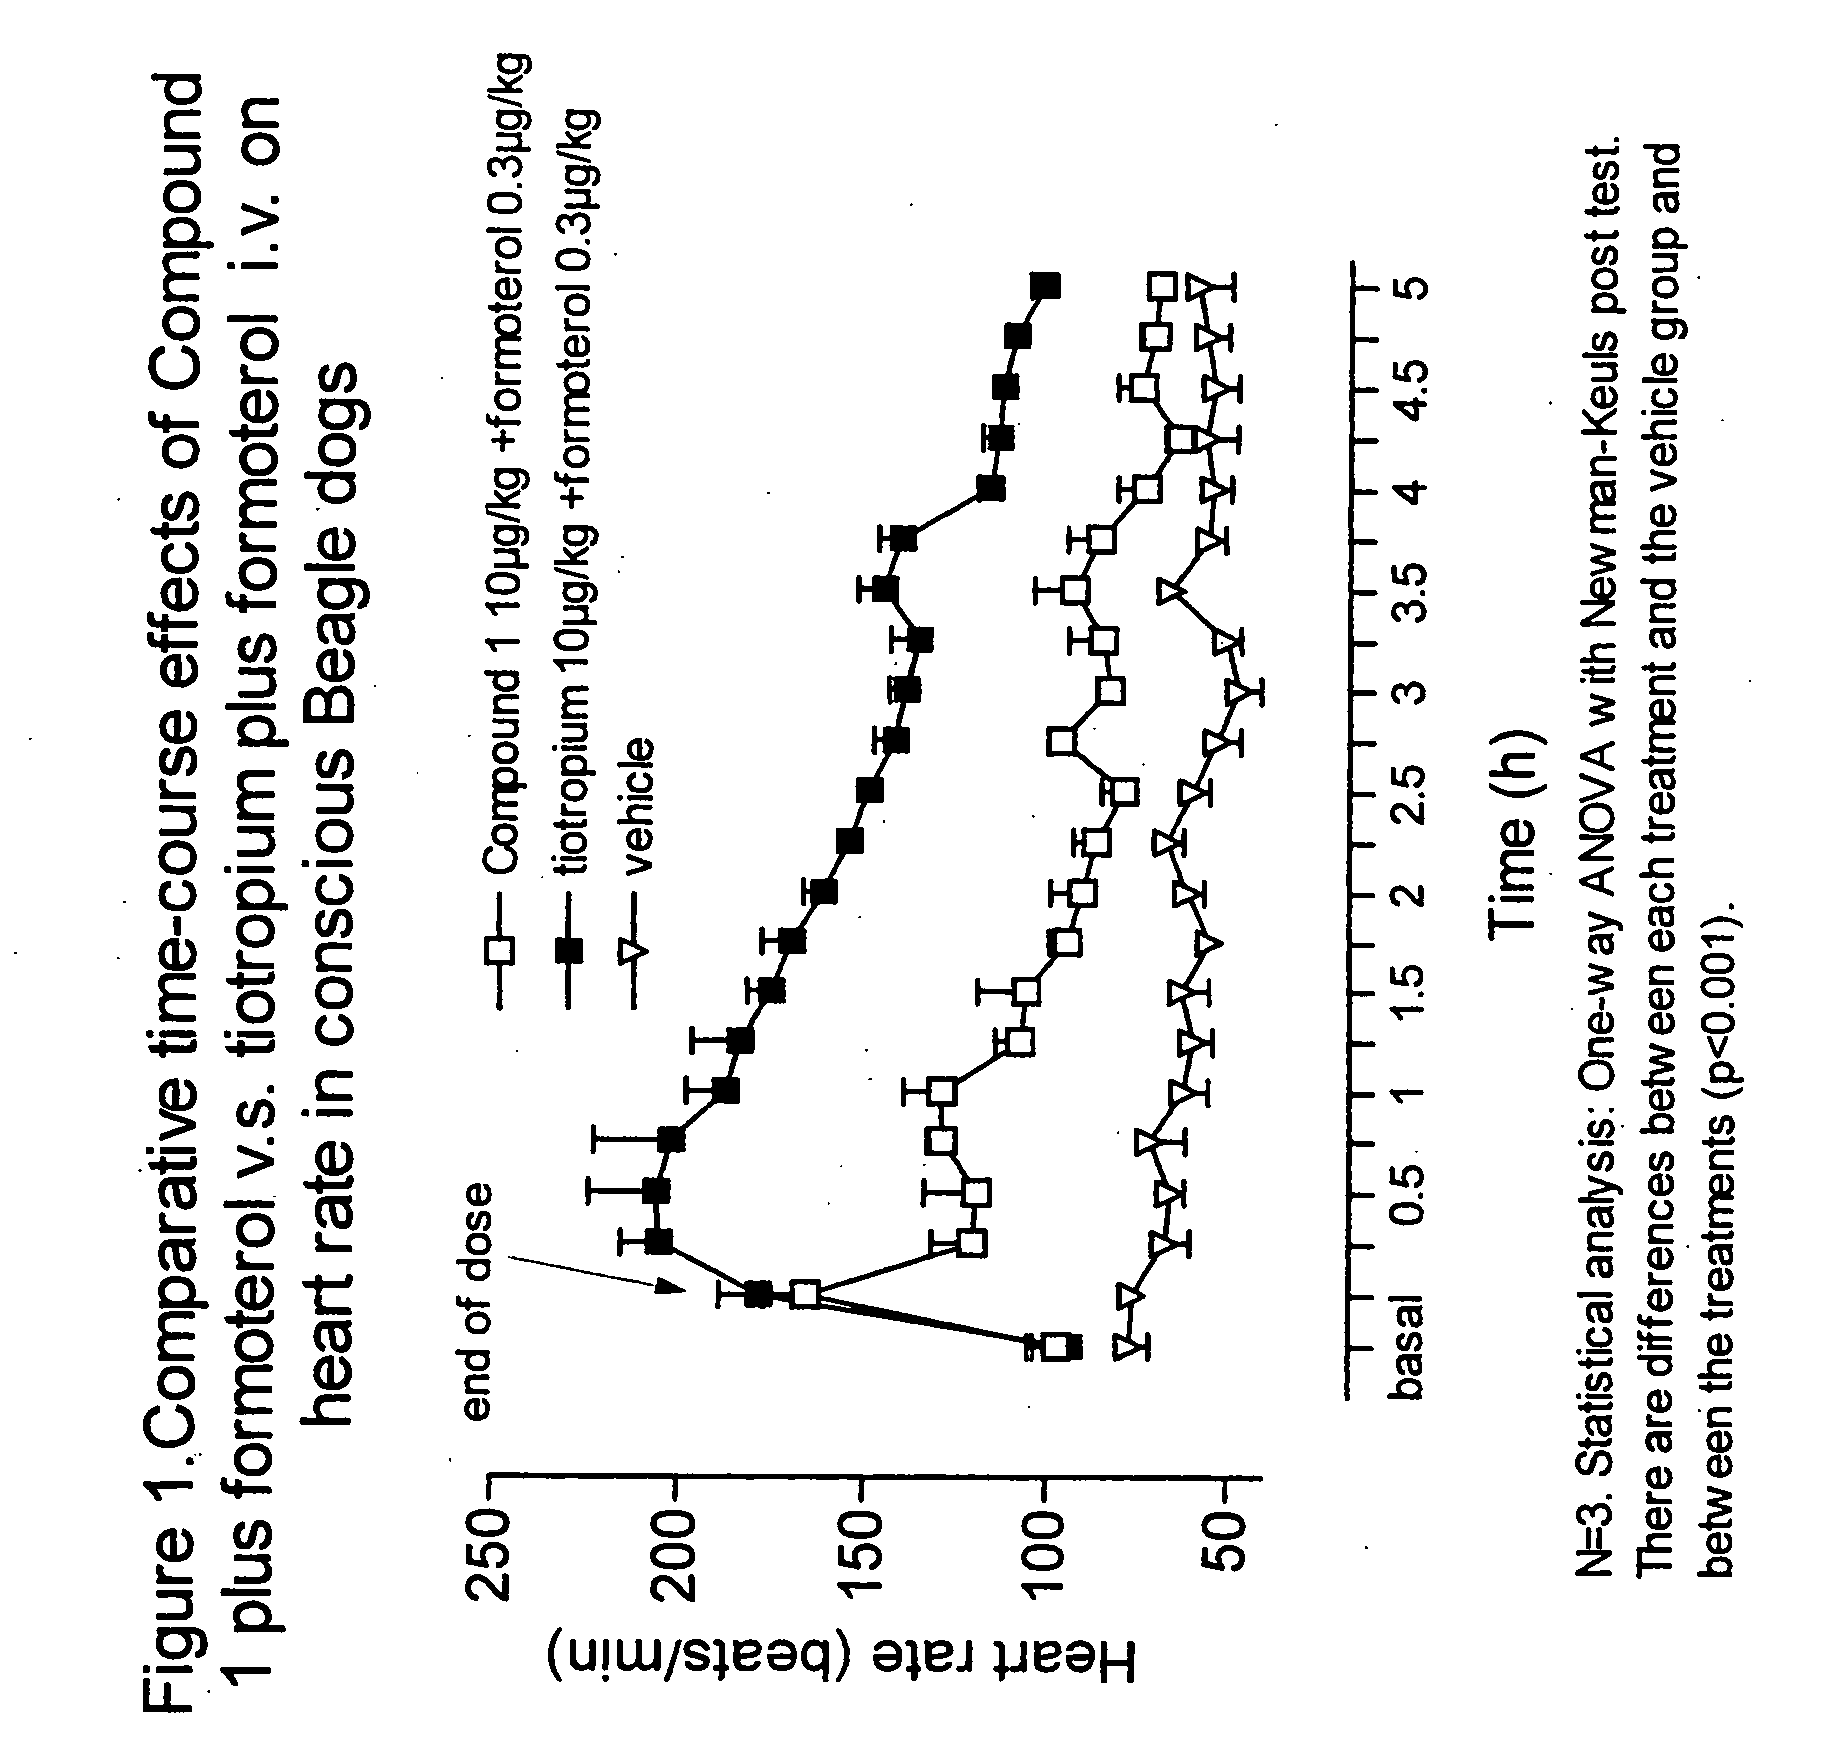 Combinations comprising antimuscarinic agents and beta-adrenergic agonists